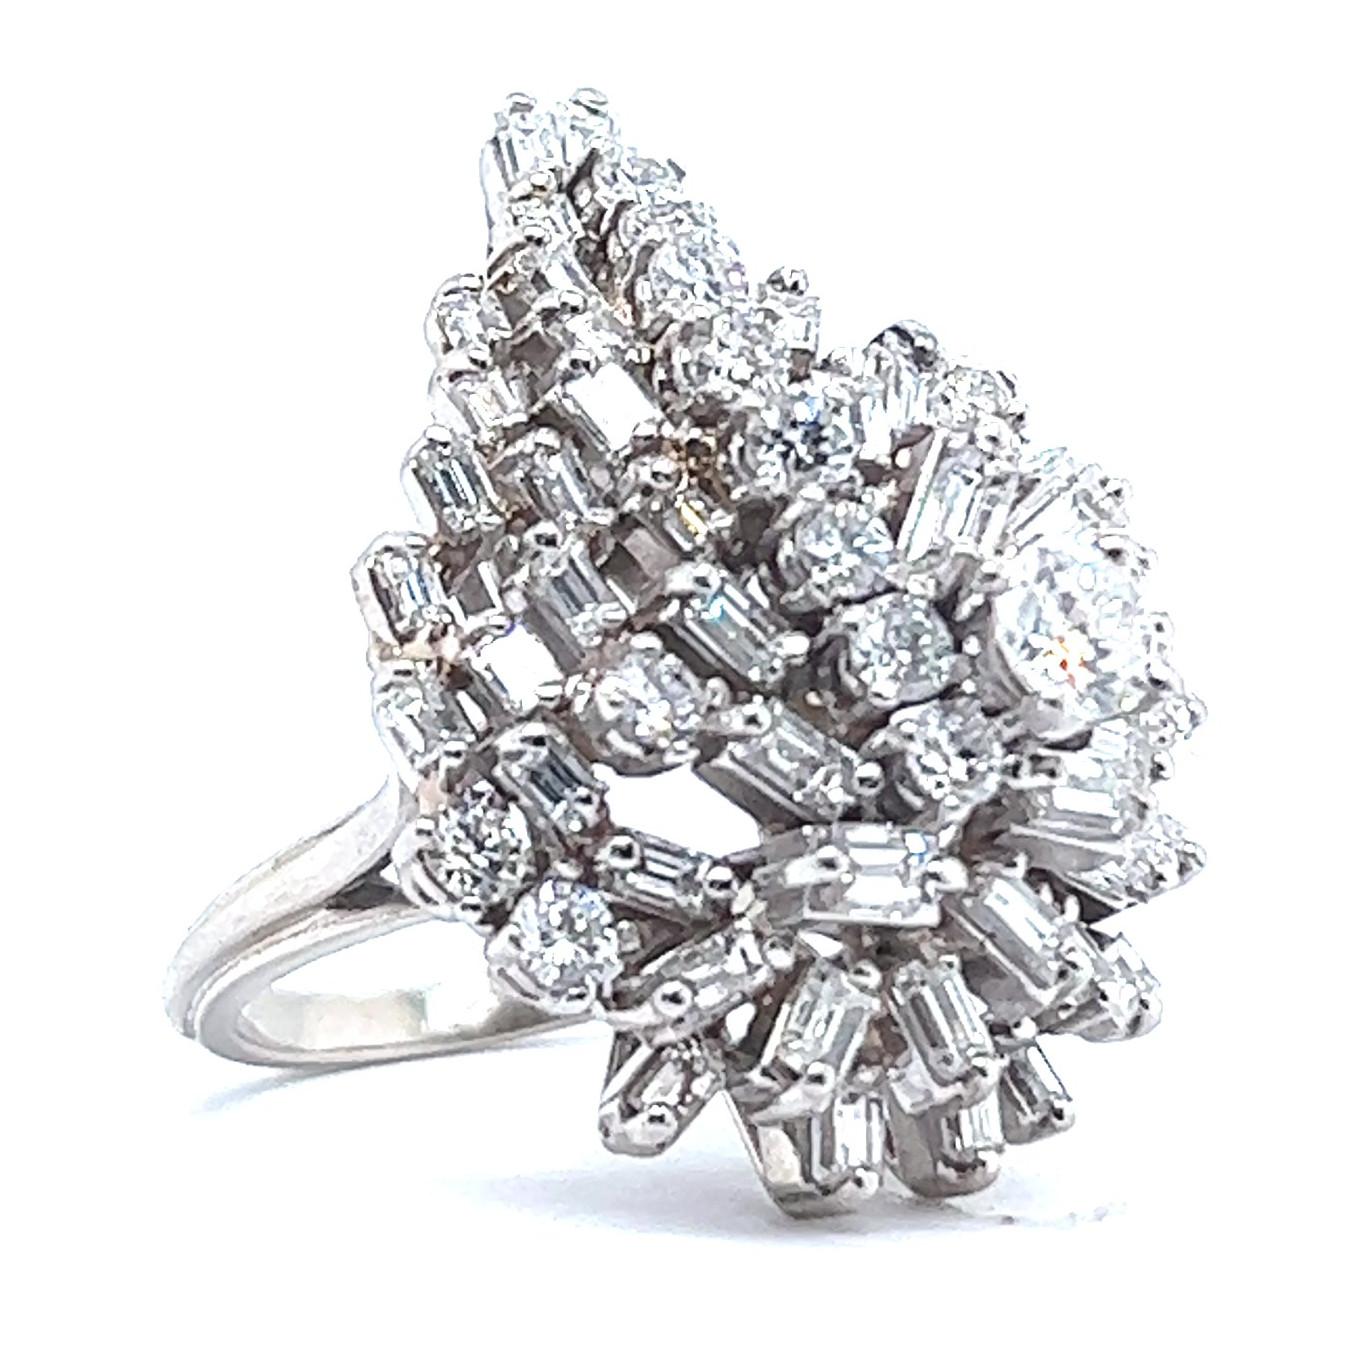 One Vintage 5.10 Carats Diamonds 18 Karat White Gold Cluster Cocktail Ring. Featuring 13 round brilliant cut diamonds with a total weight of approximately 1.60 carats, graded F color, VS clarity. Accented by 45 baguette cut diamonds with a total